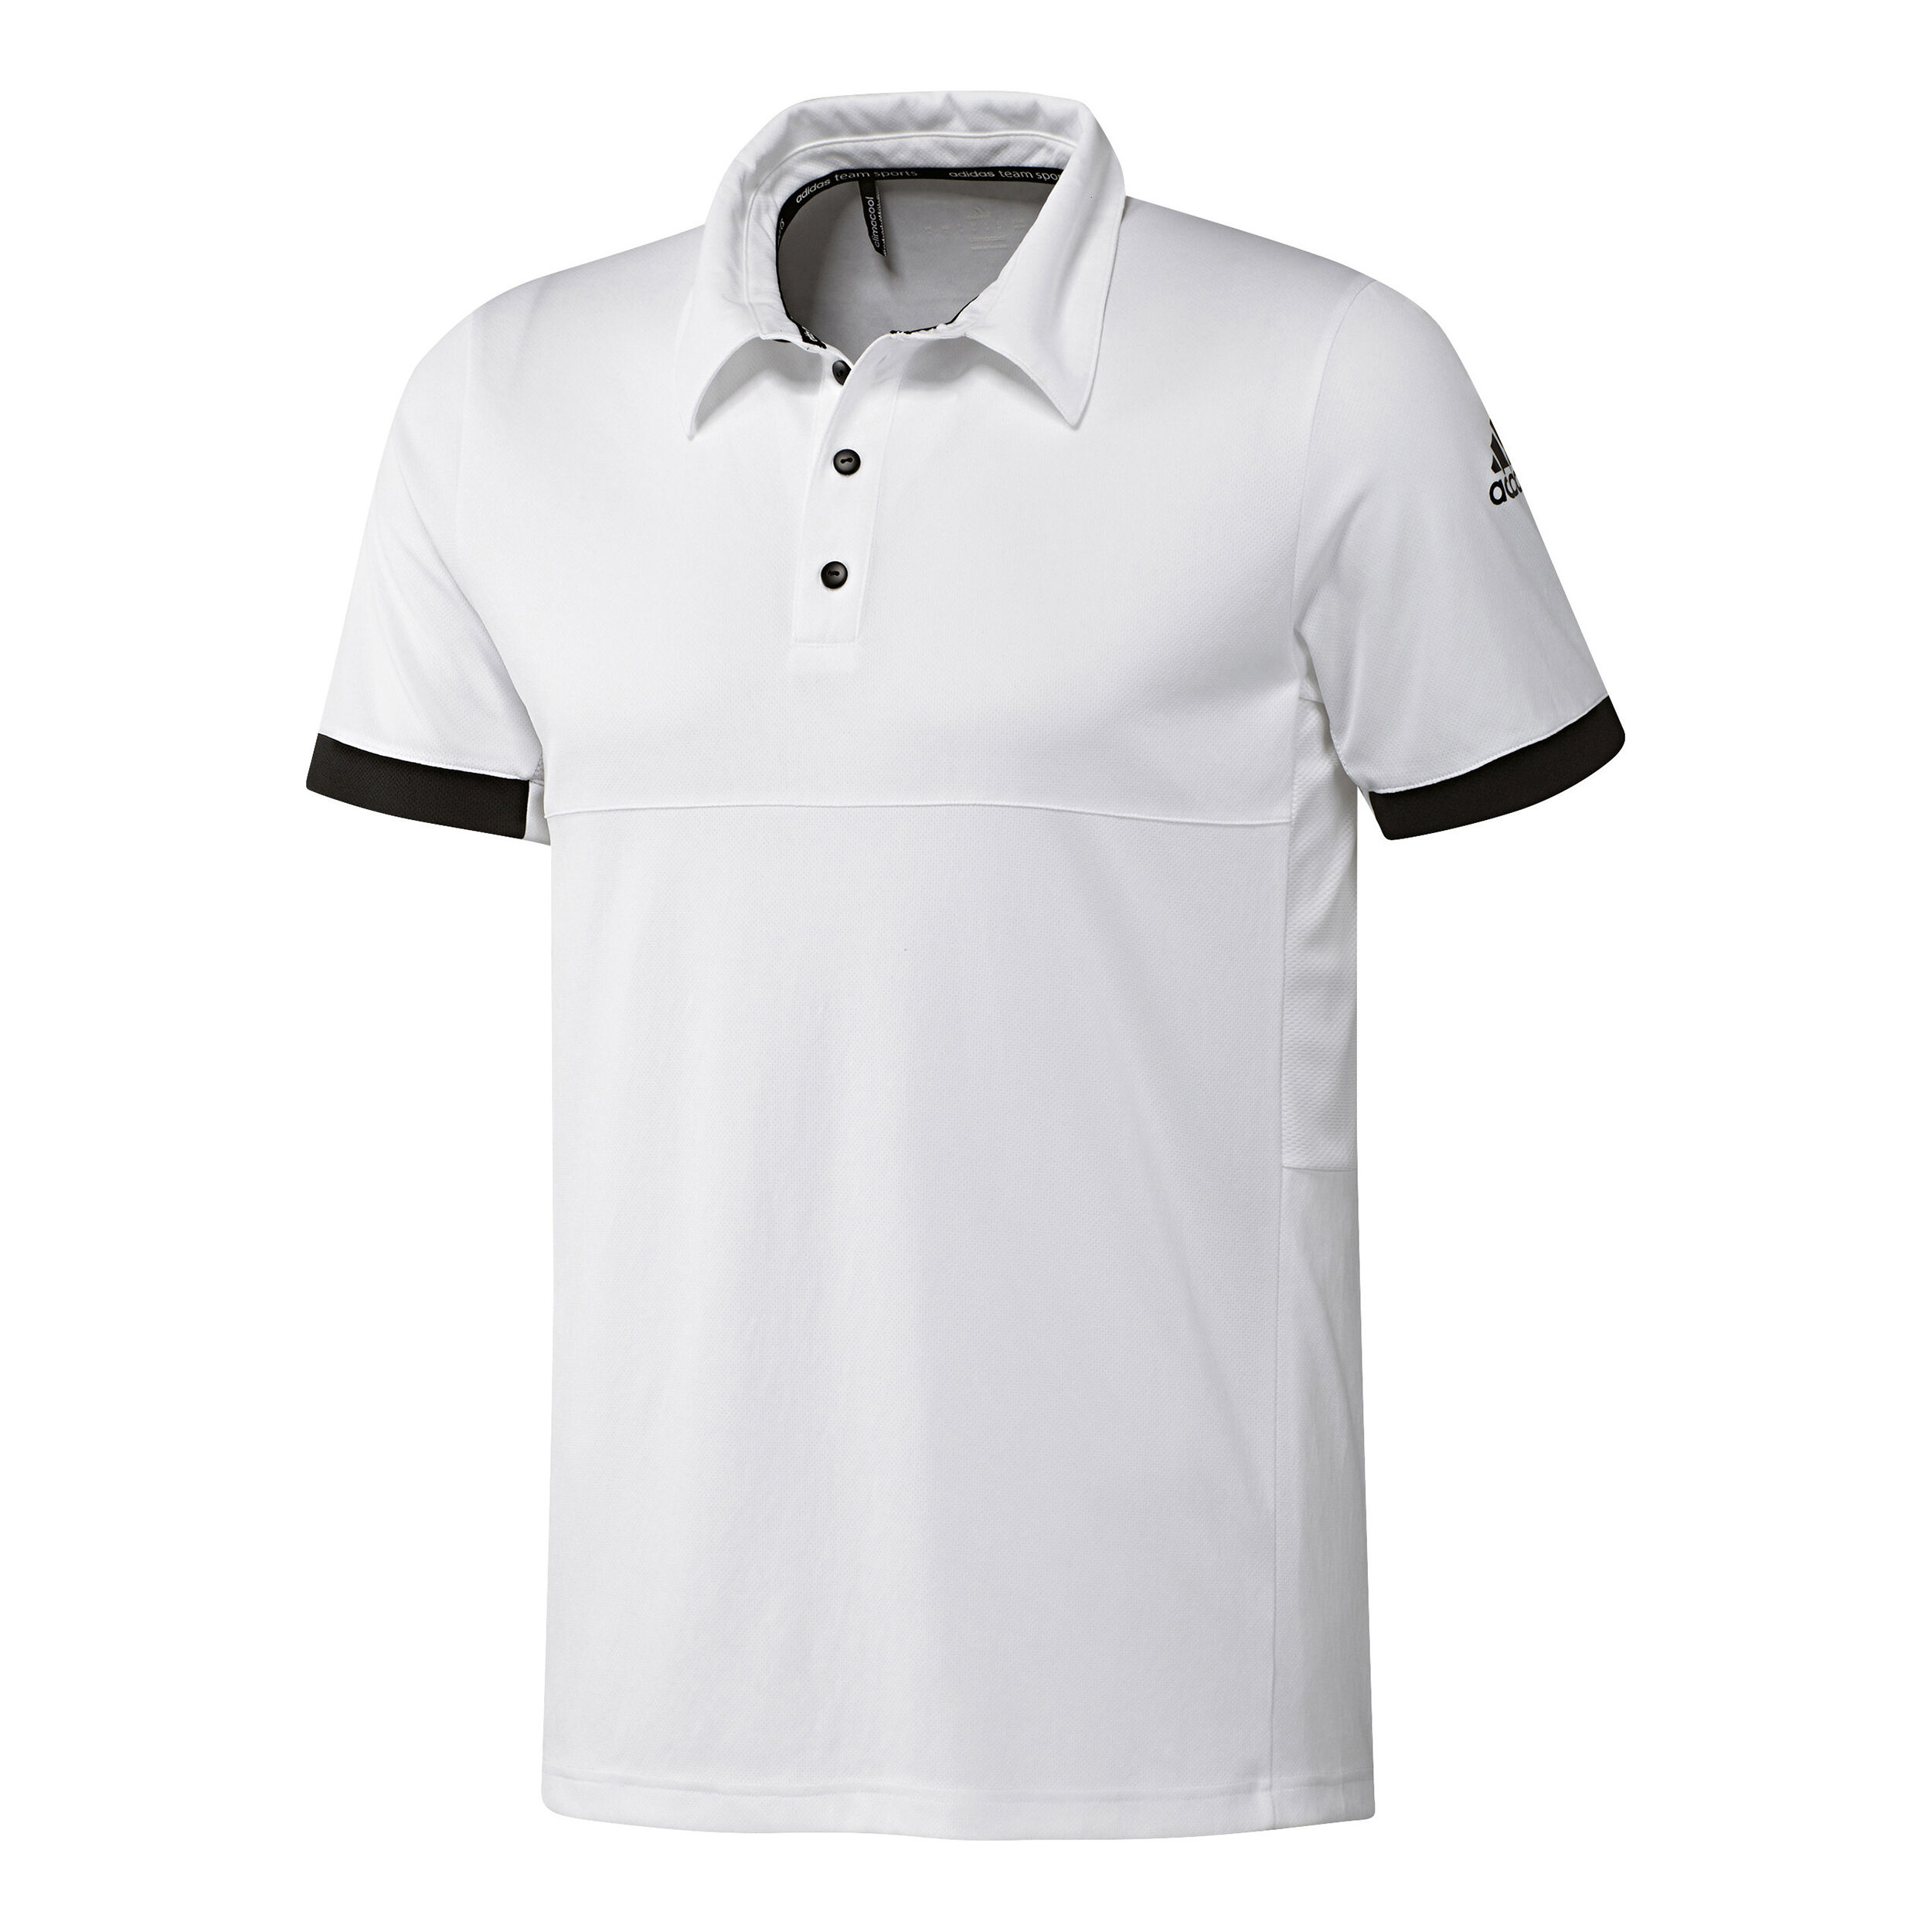 adidas t16 climacool polo dames